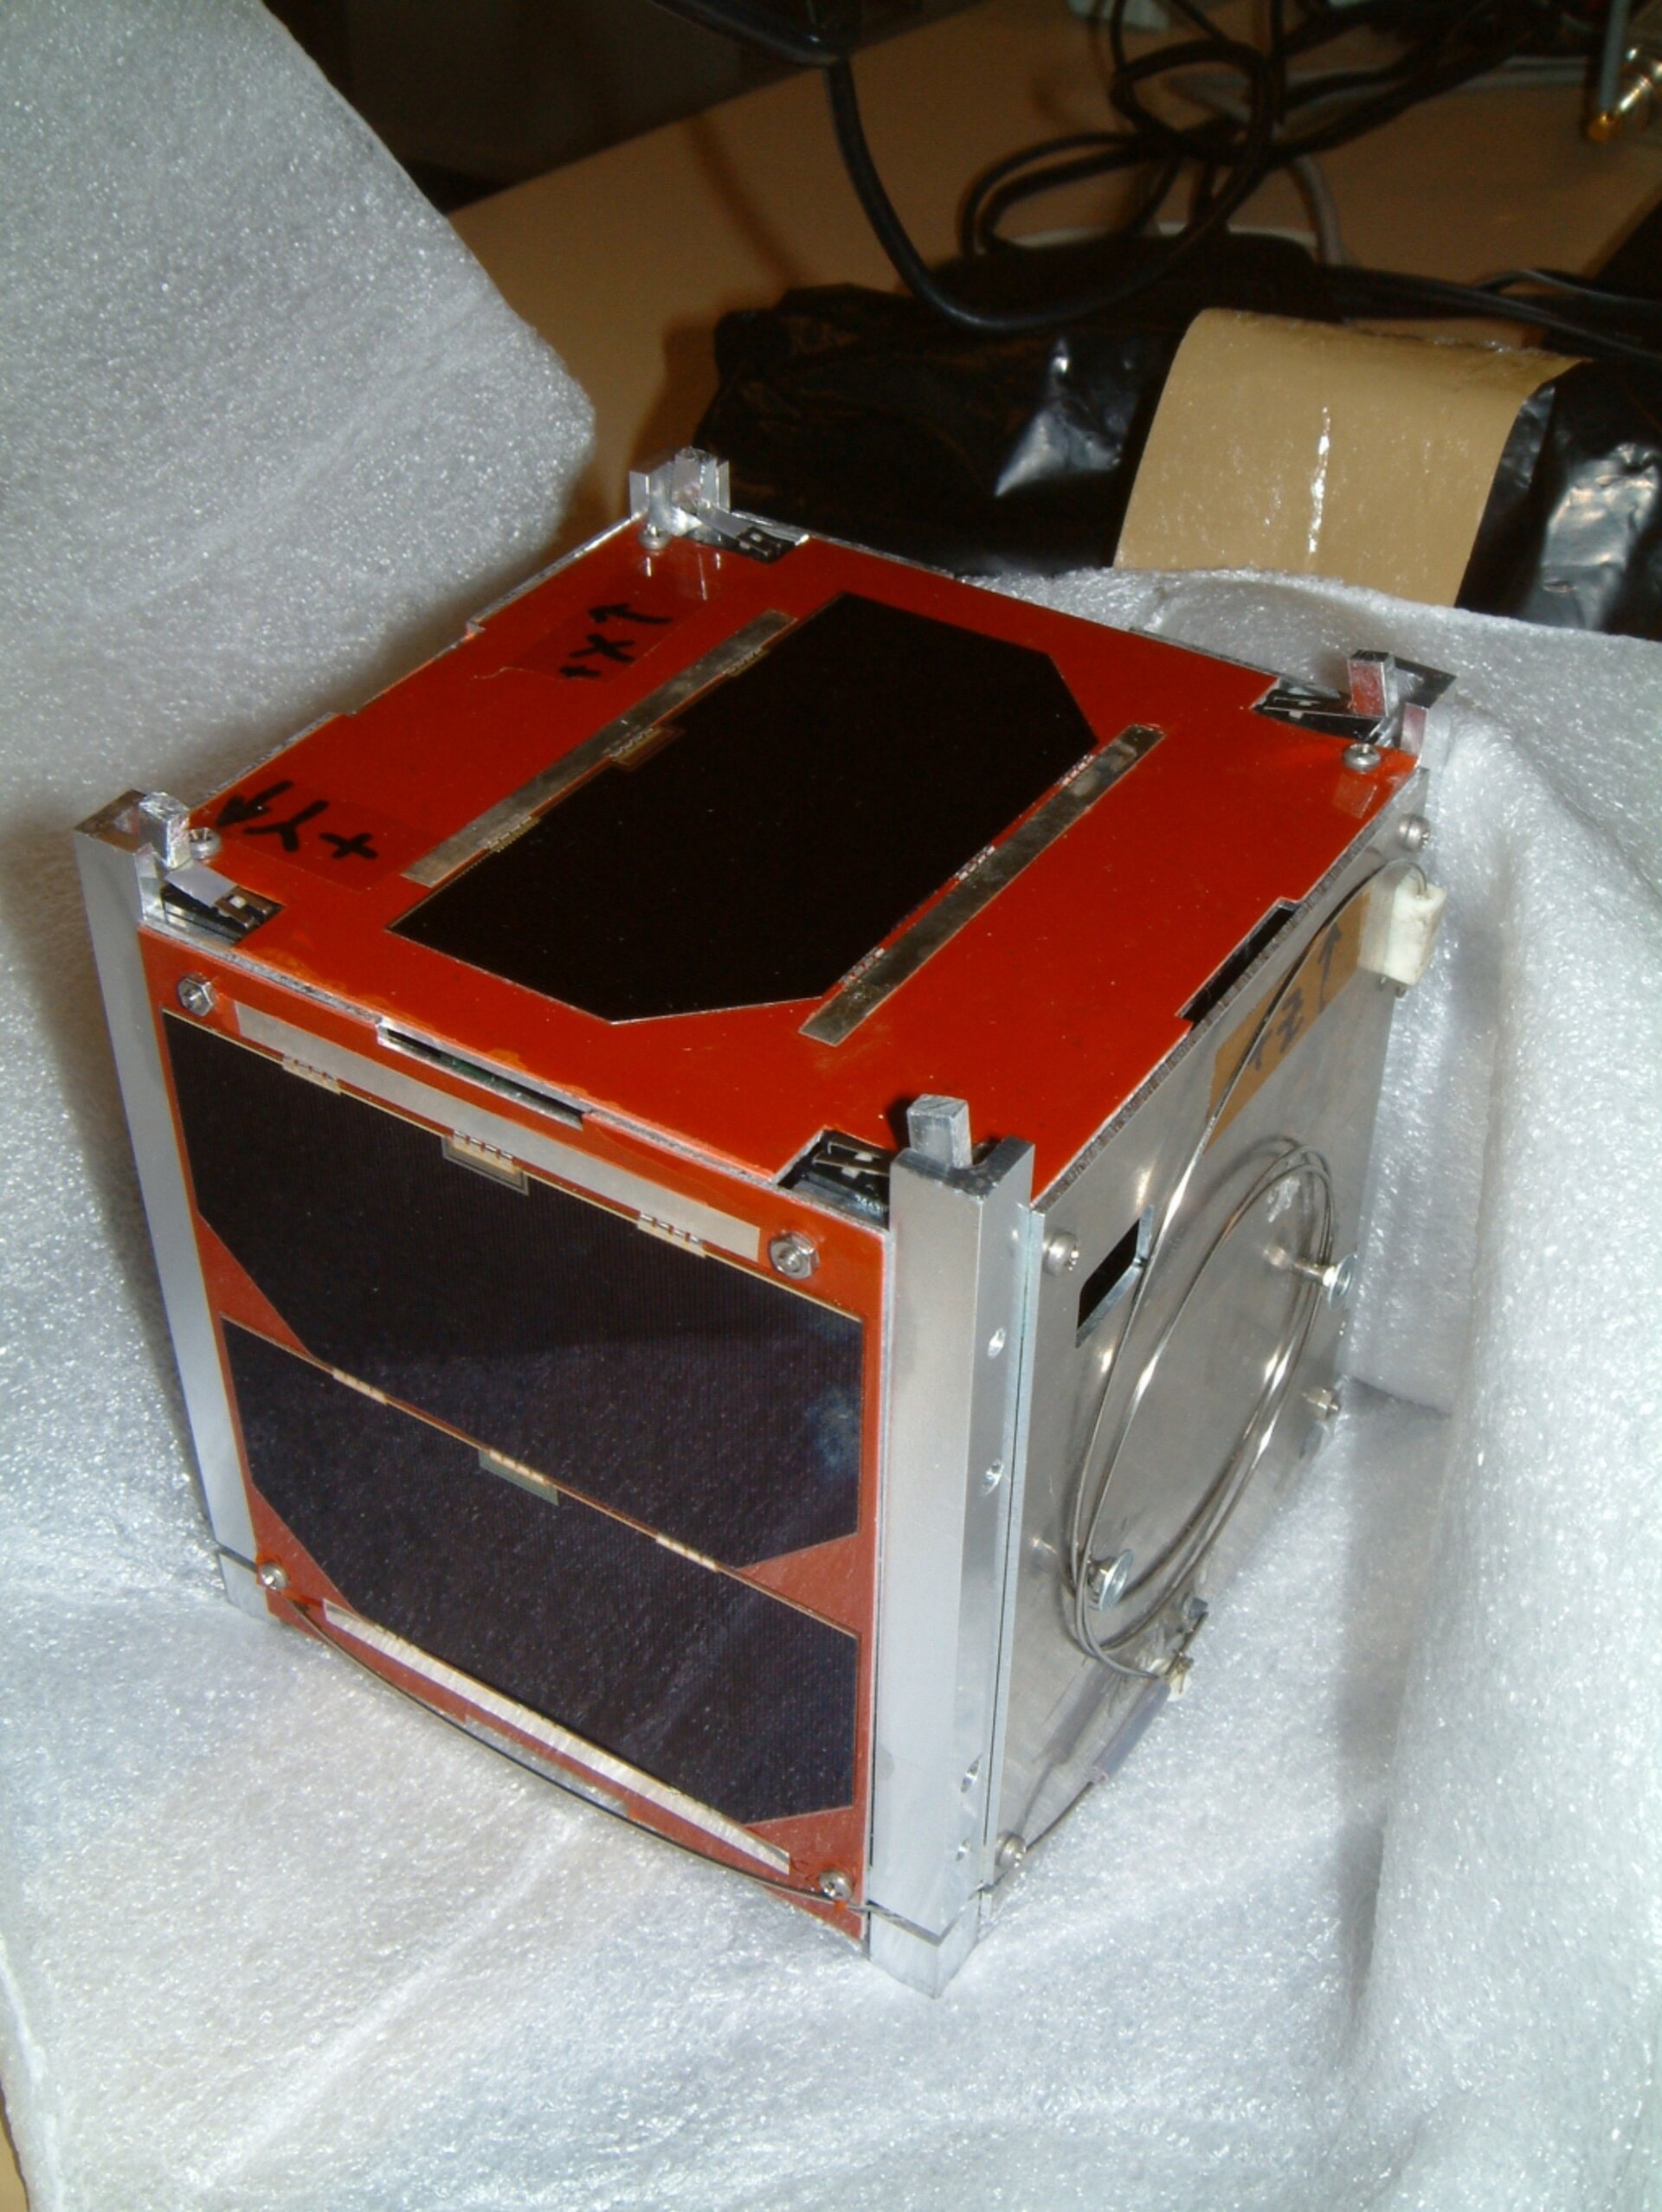 An engineering model of UWE-1 cubesat that will be one of the payloads on the SSETI Express